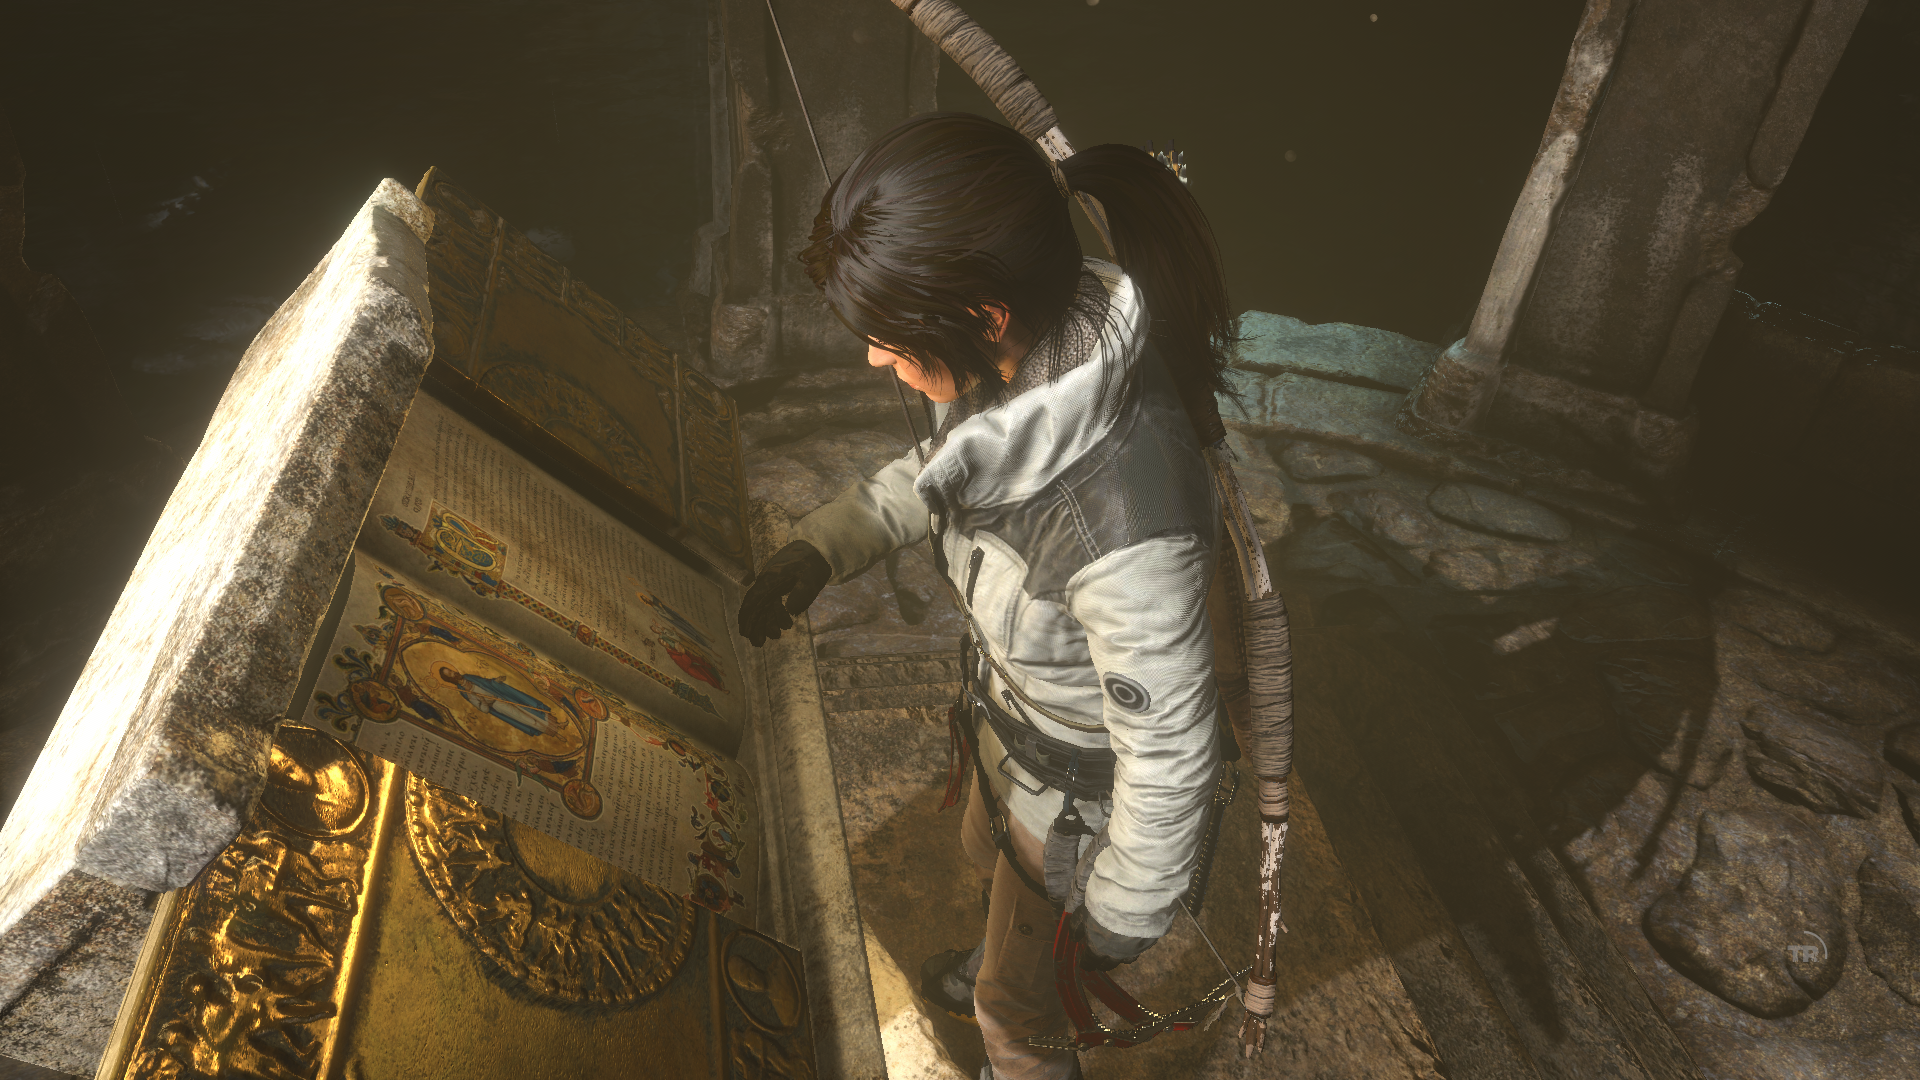 General 1920x1080 Rise of the Tomb Raider video games screen shot Tomb Raider Lara Croft (Tomb Raider) PC gaming